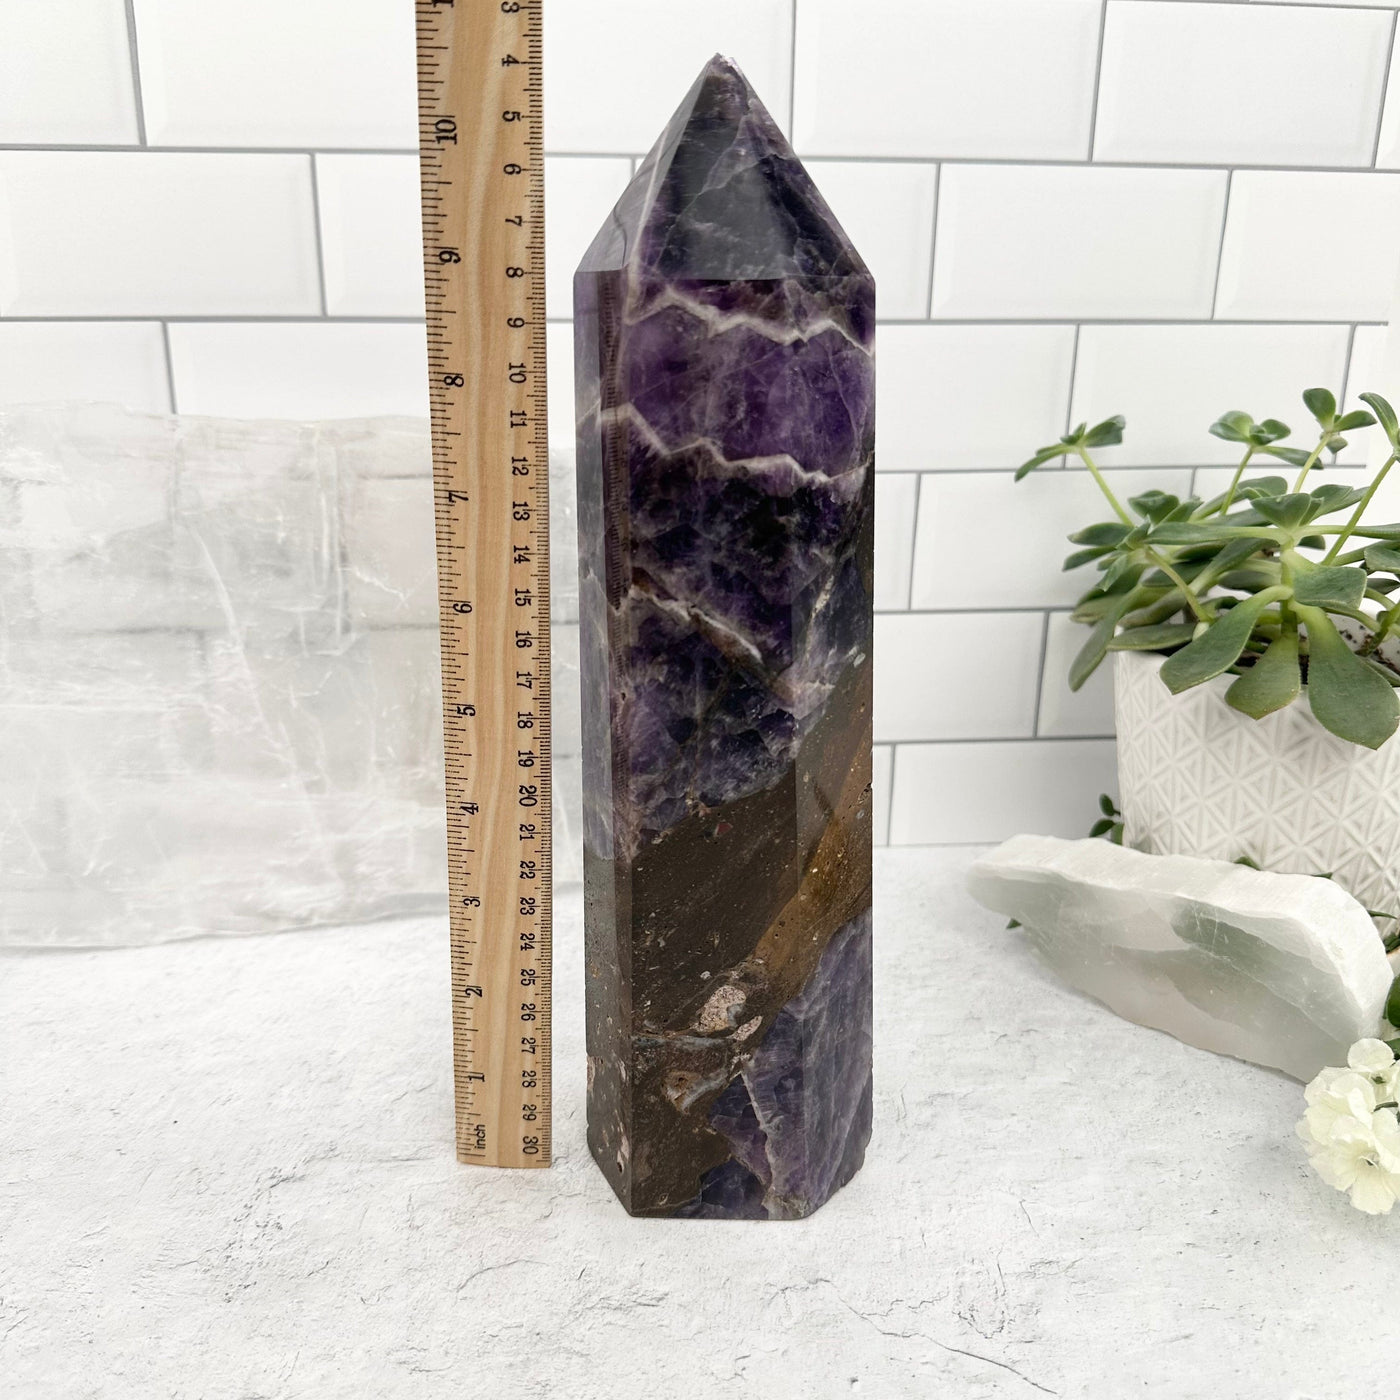 Chevron Amethyst Polished Point - with ruler for size reference 